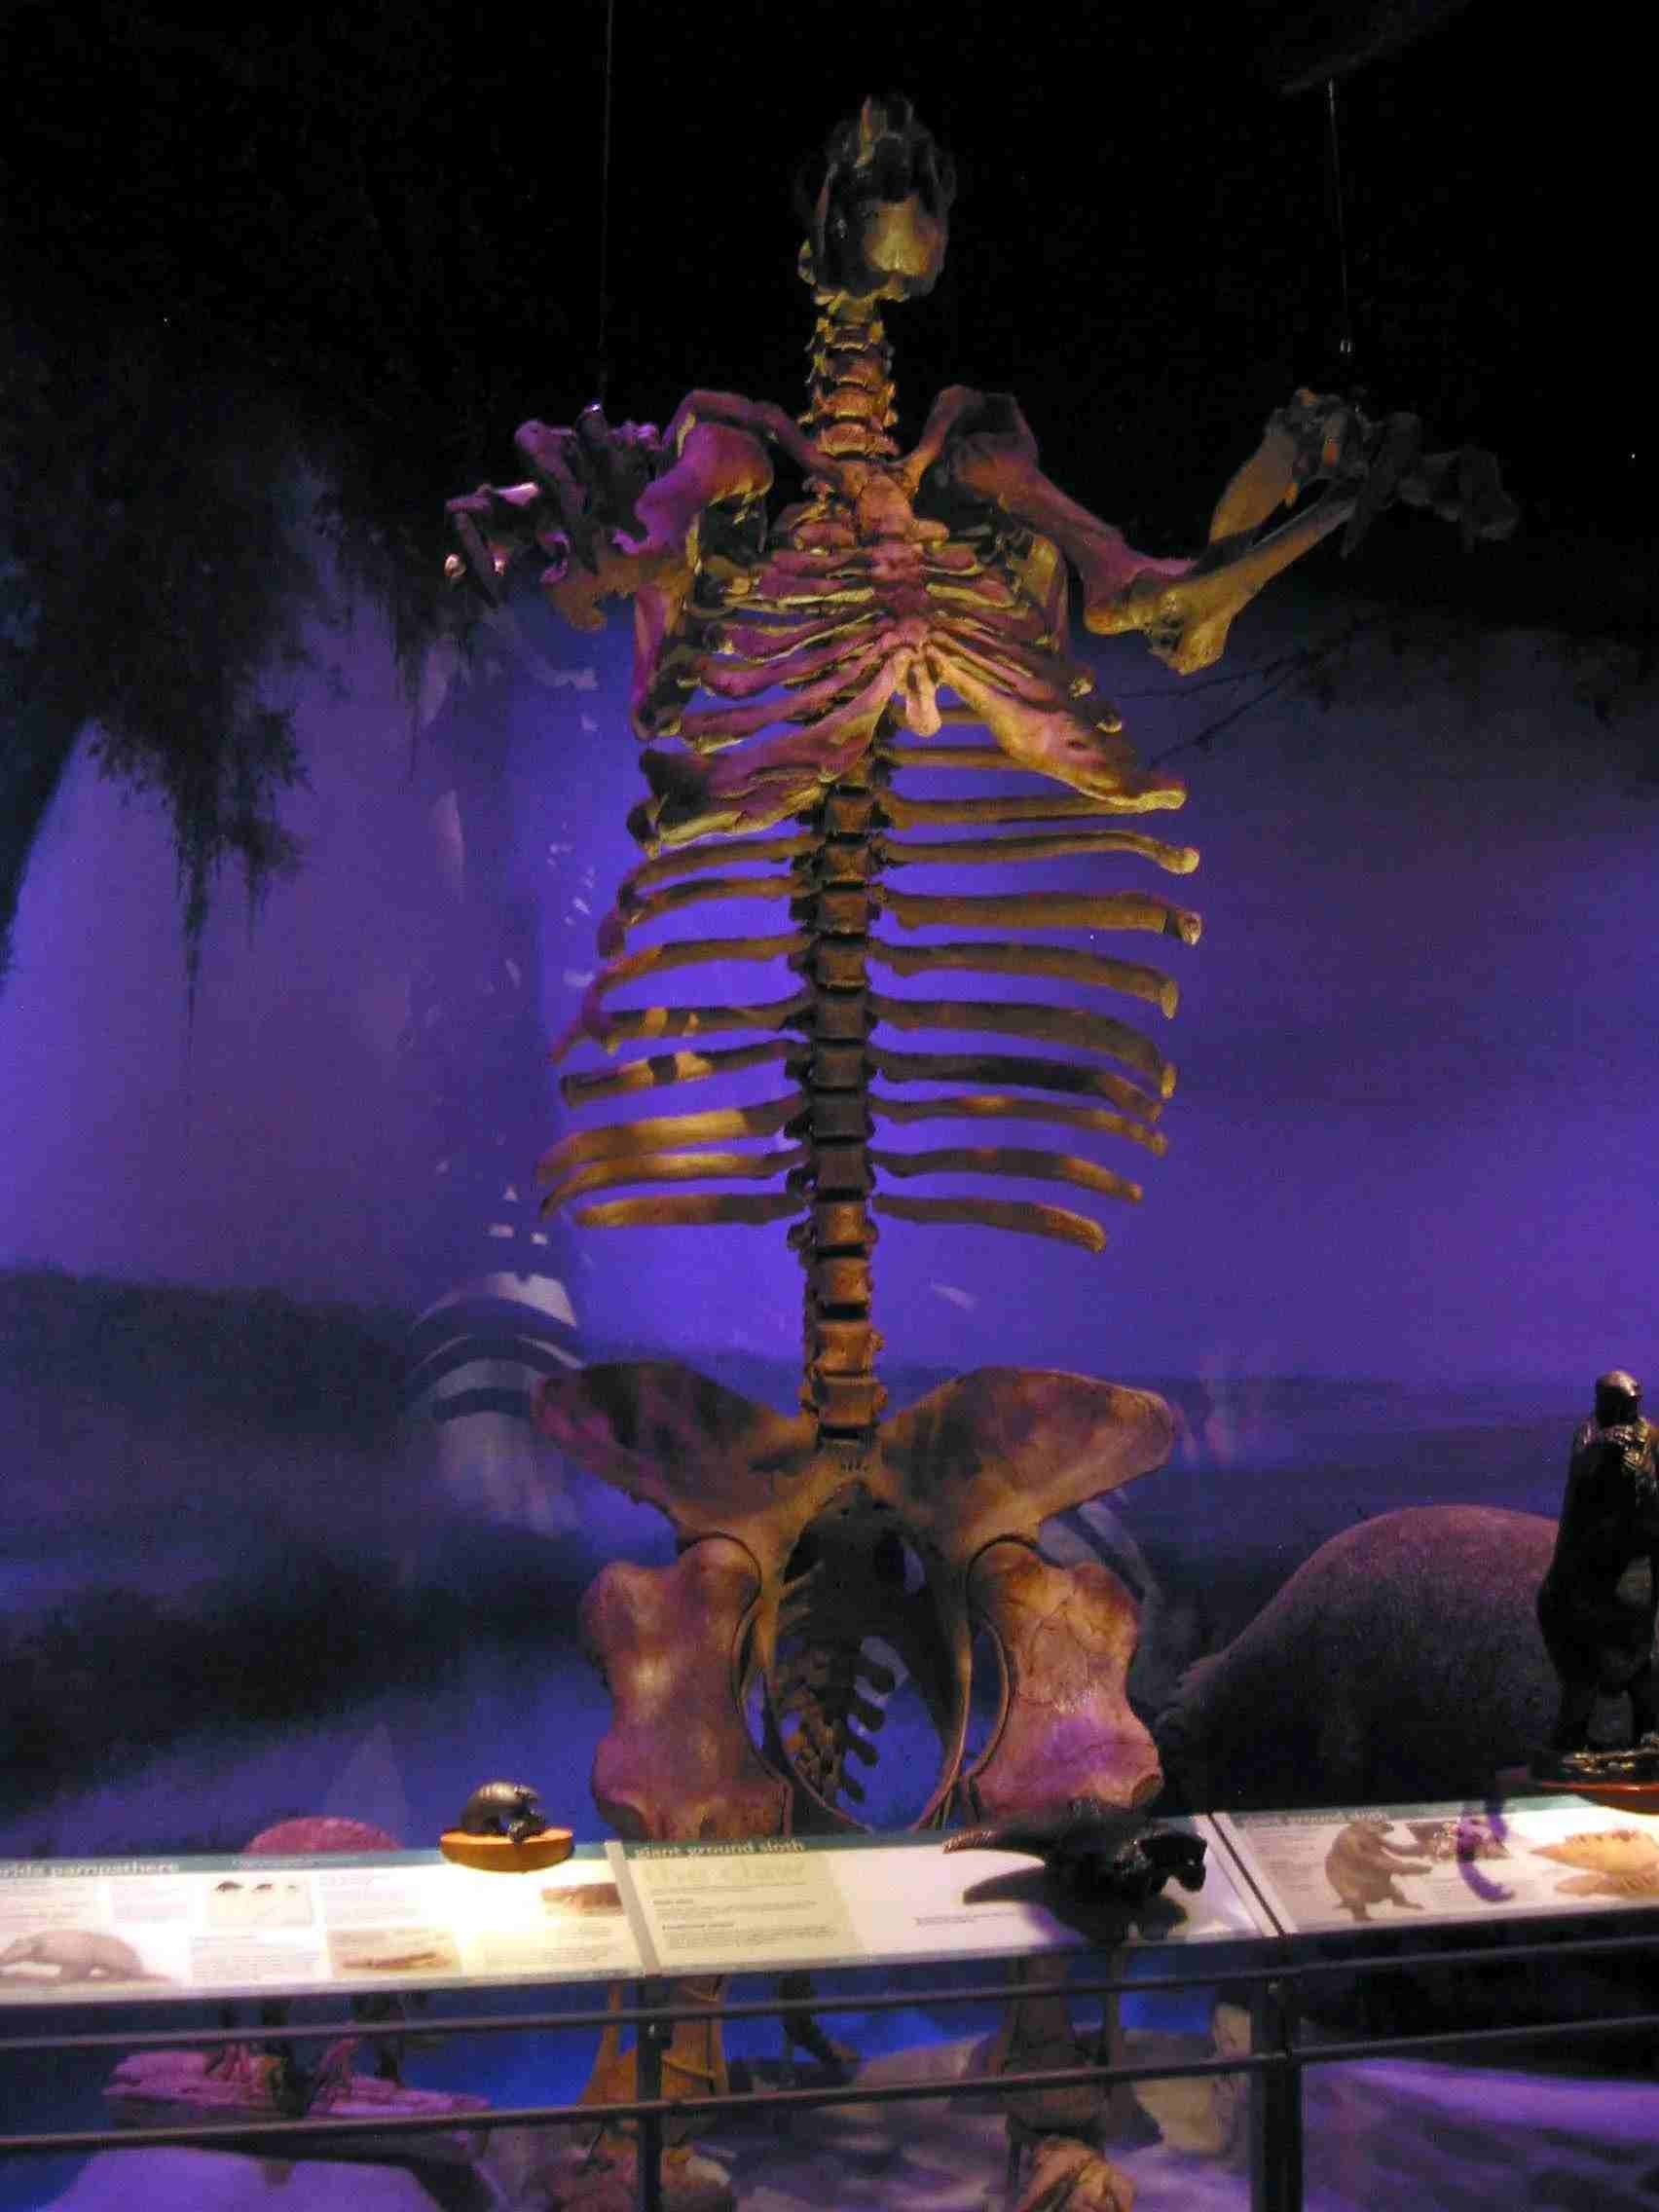 Giant ground sloths have wide muscular tail